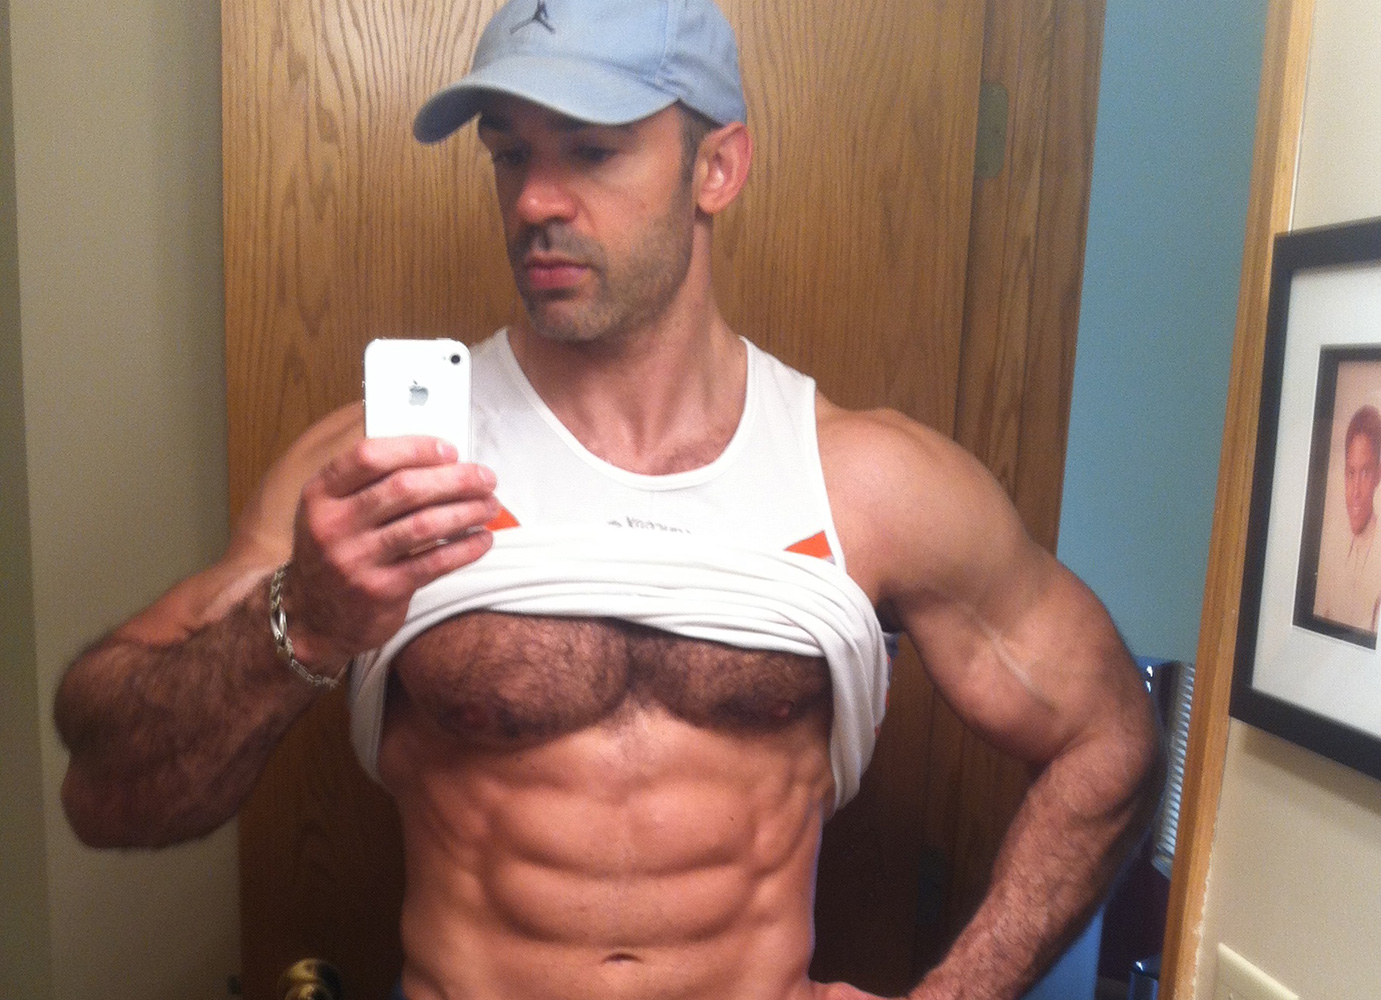 How To Get Lean, STON Nutrition, Ryan Stoner recent pic